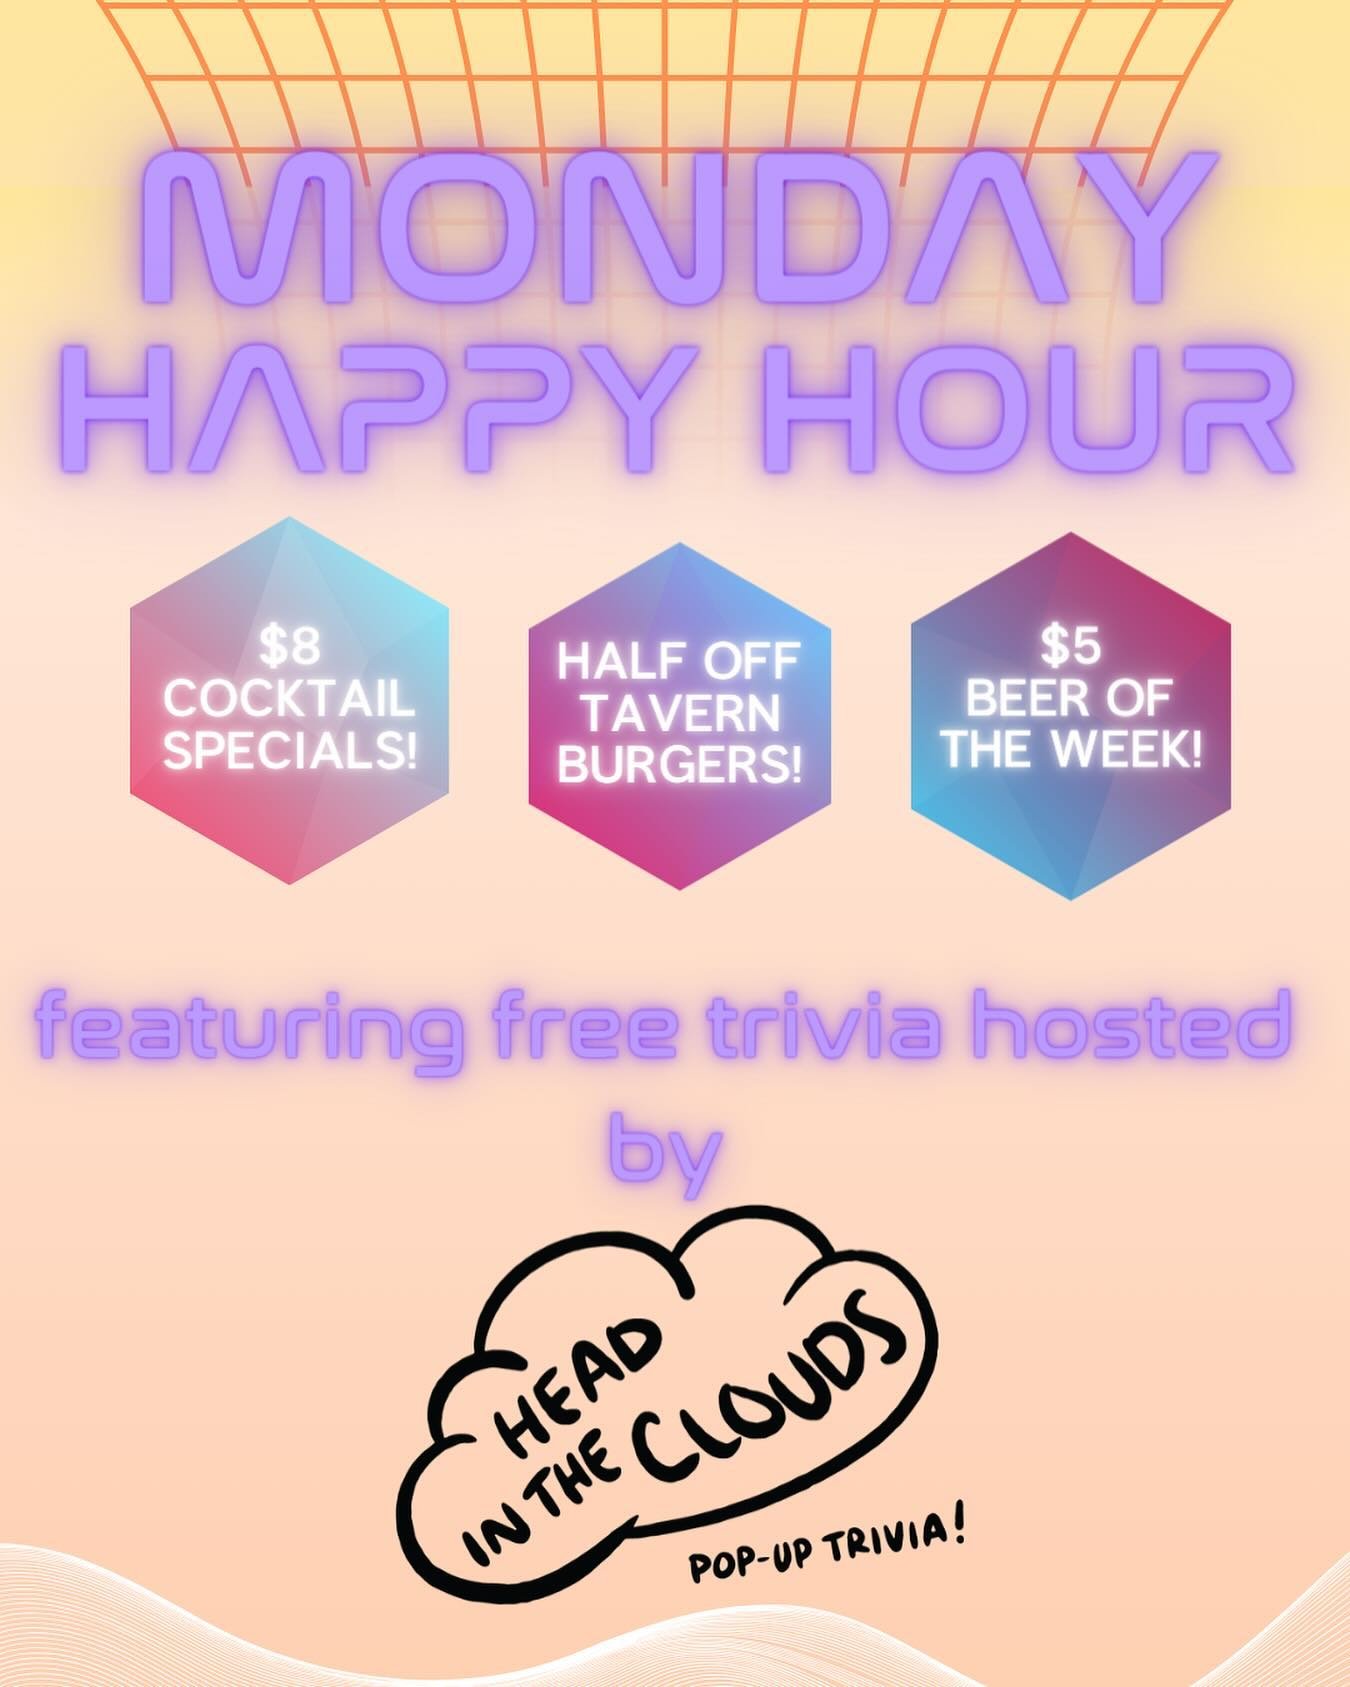 EVERY MONDAY WE&rsquo;RE SLINGING HALF-PRICED TAVERN BURGS, $8 COCKTAIL SPECIALS, AND THE $5 BEER OF THE WEEK!!

Oh, use my inside voice? OKAY!

AND starting Monday, April 22 at 7:30 pm @headinthecloudstrivia will be here every Monday to test your kn